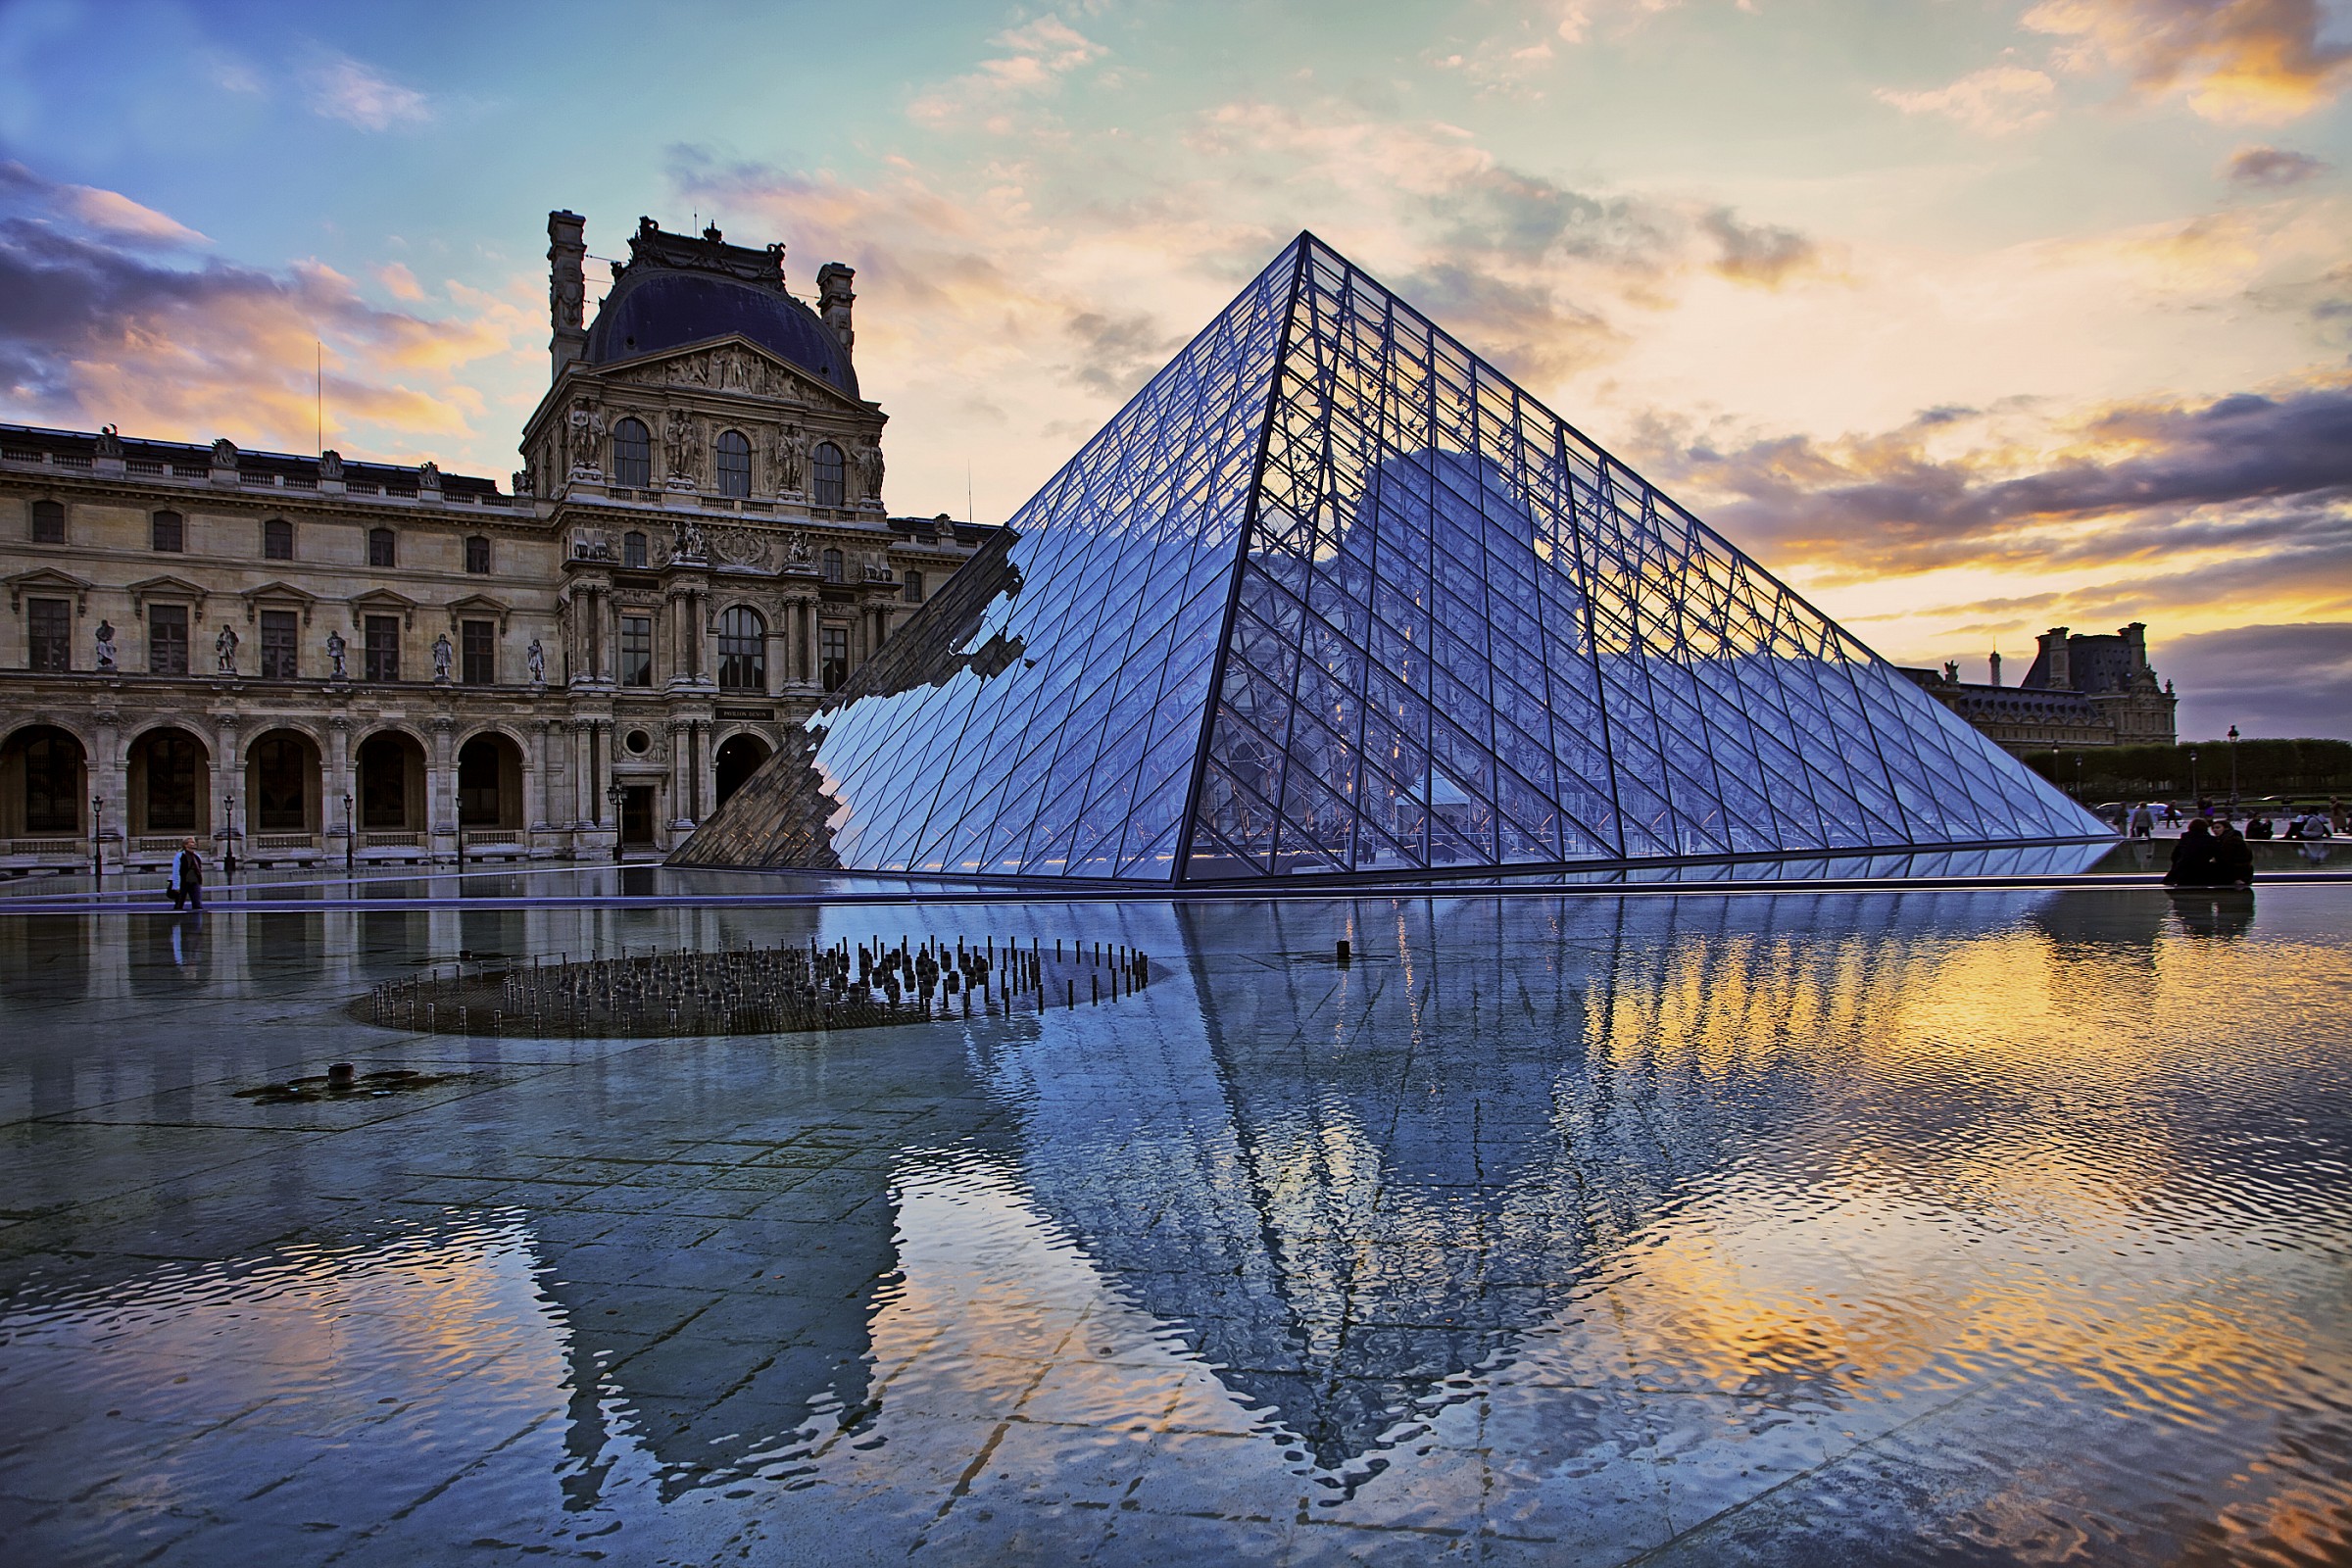 The pyramids of the Louvre...